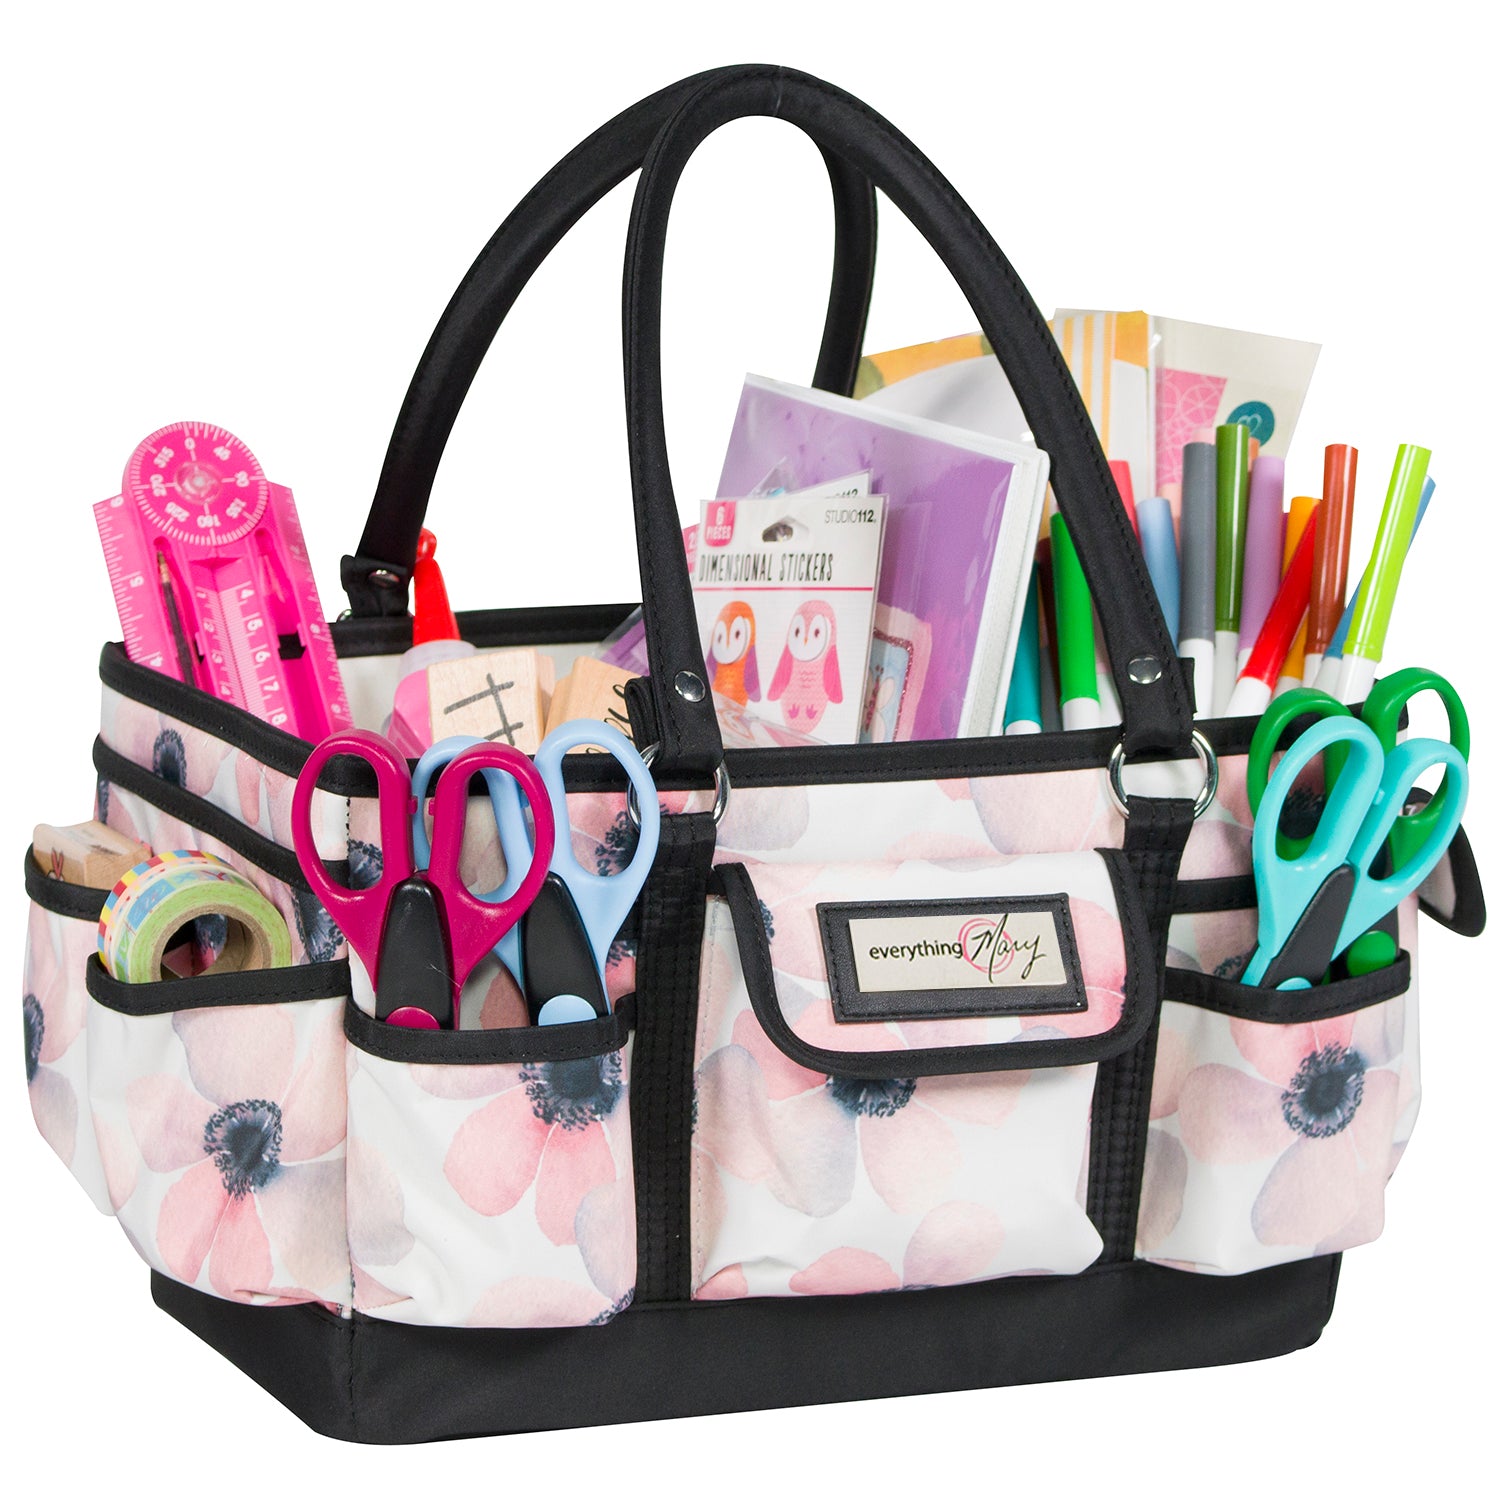 Large Craft Storage Tote Bag 6 Pockets Scrapbooking Sewing Supplies  Organizer Caddy with Handles for Travel